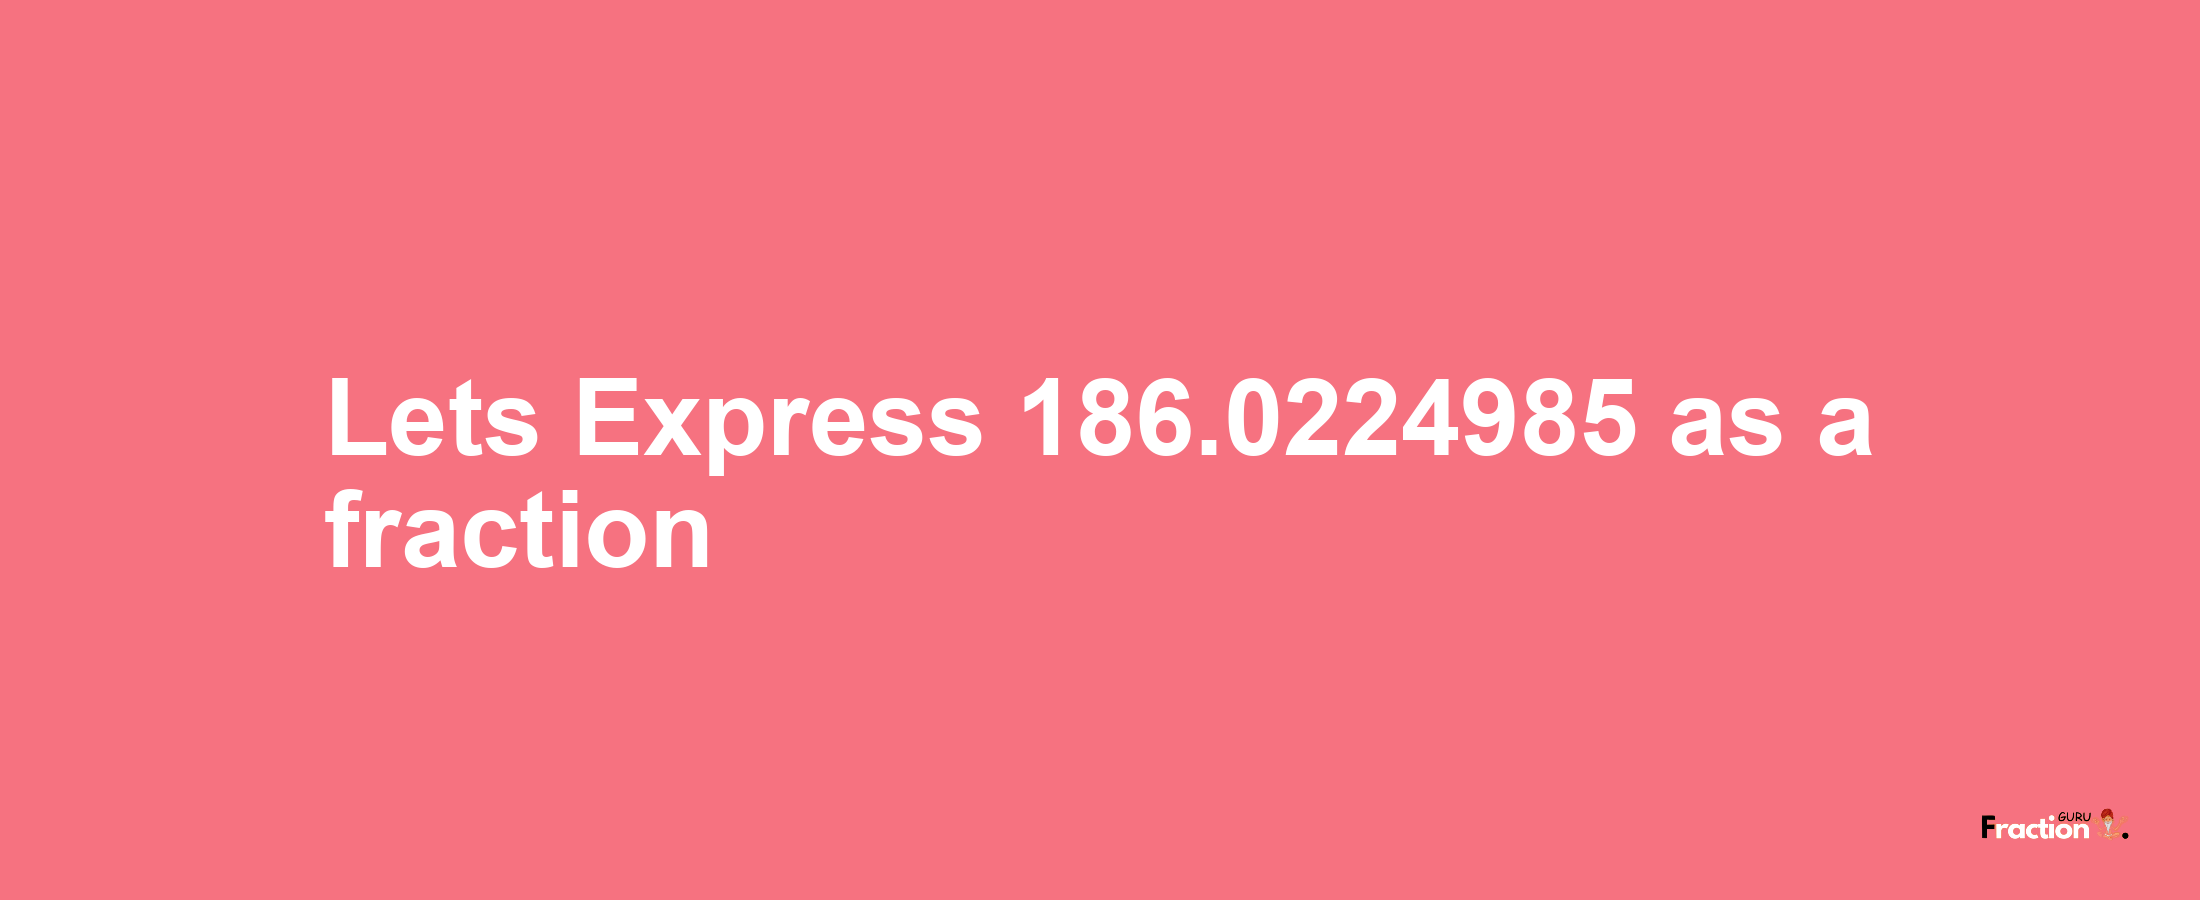 Lets Express 186.0224985 as afraction